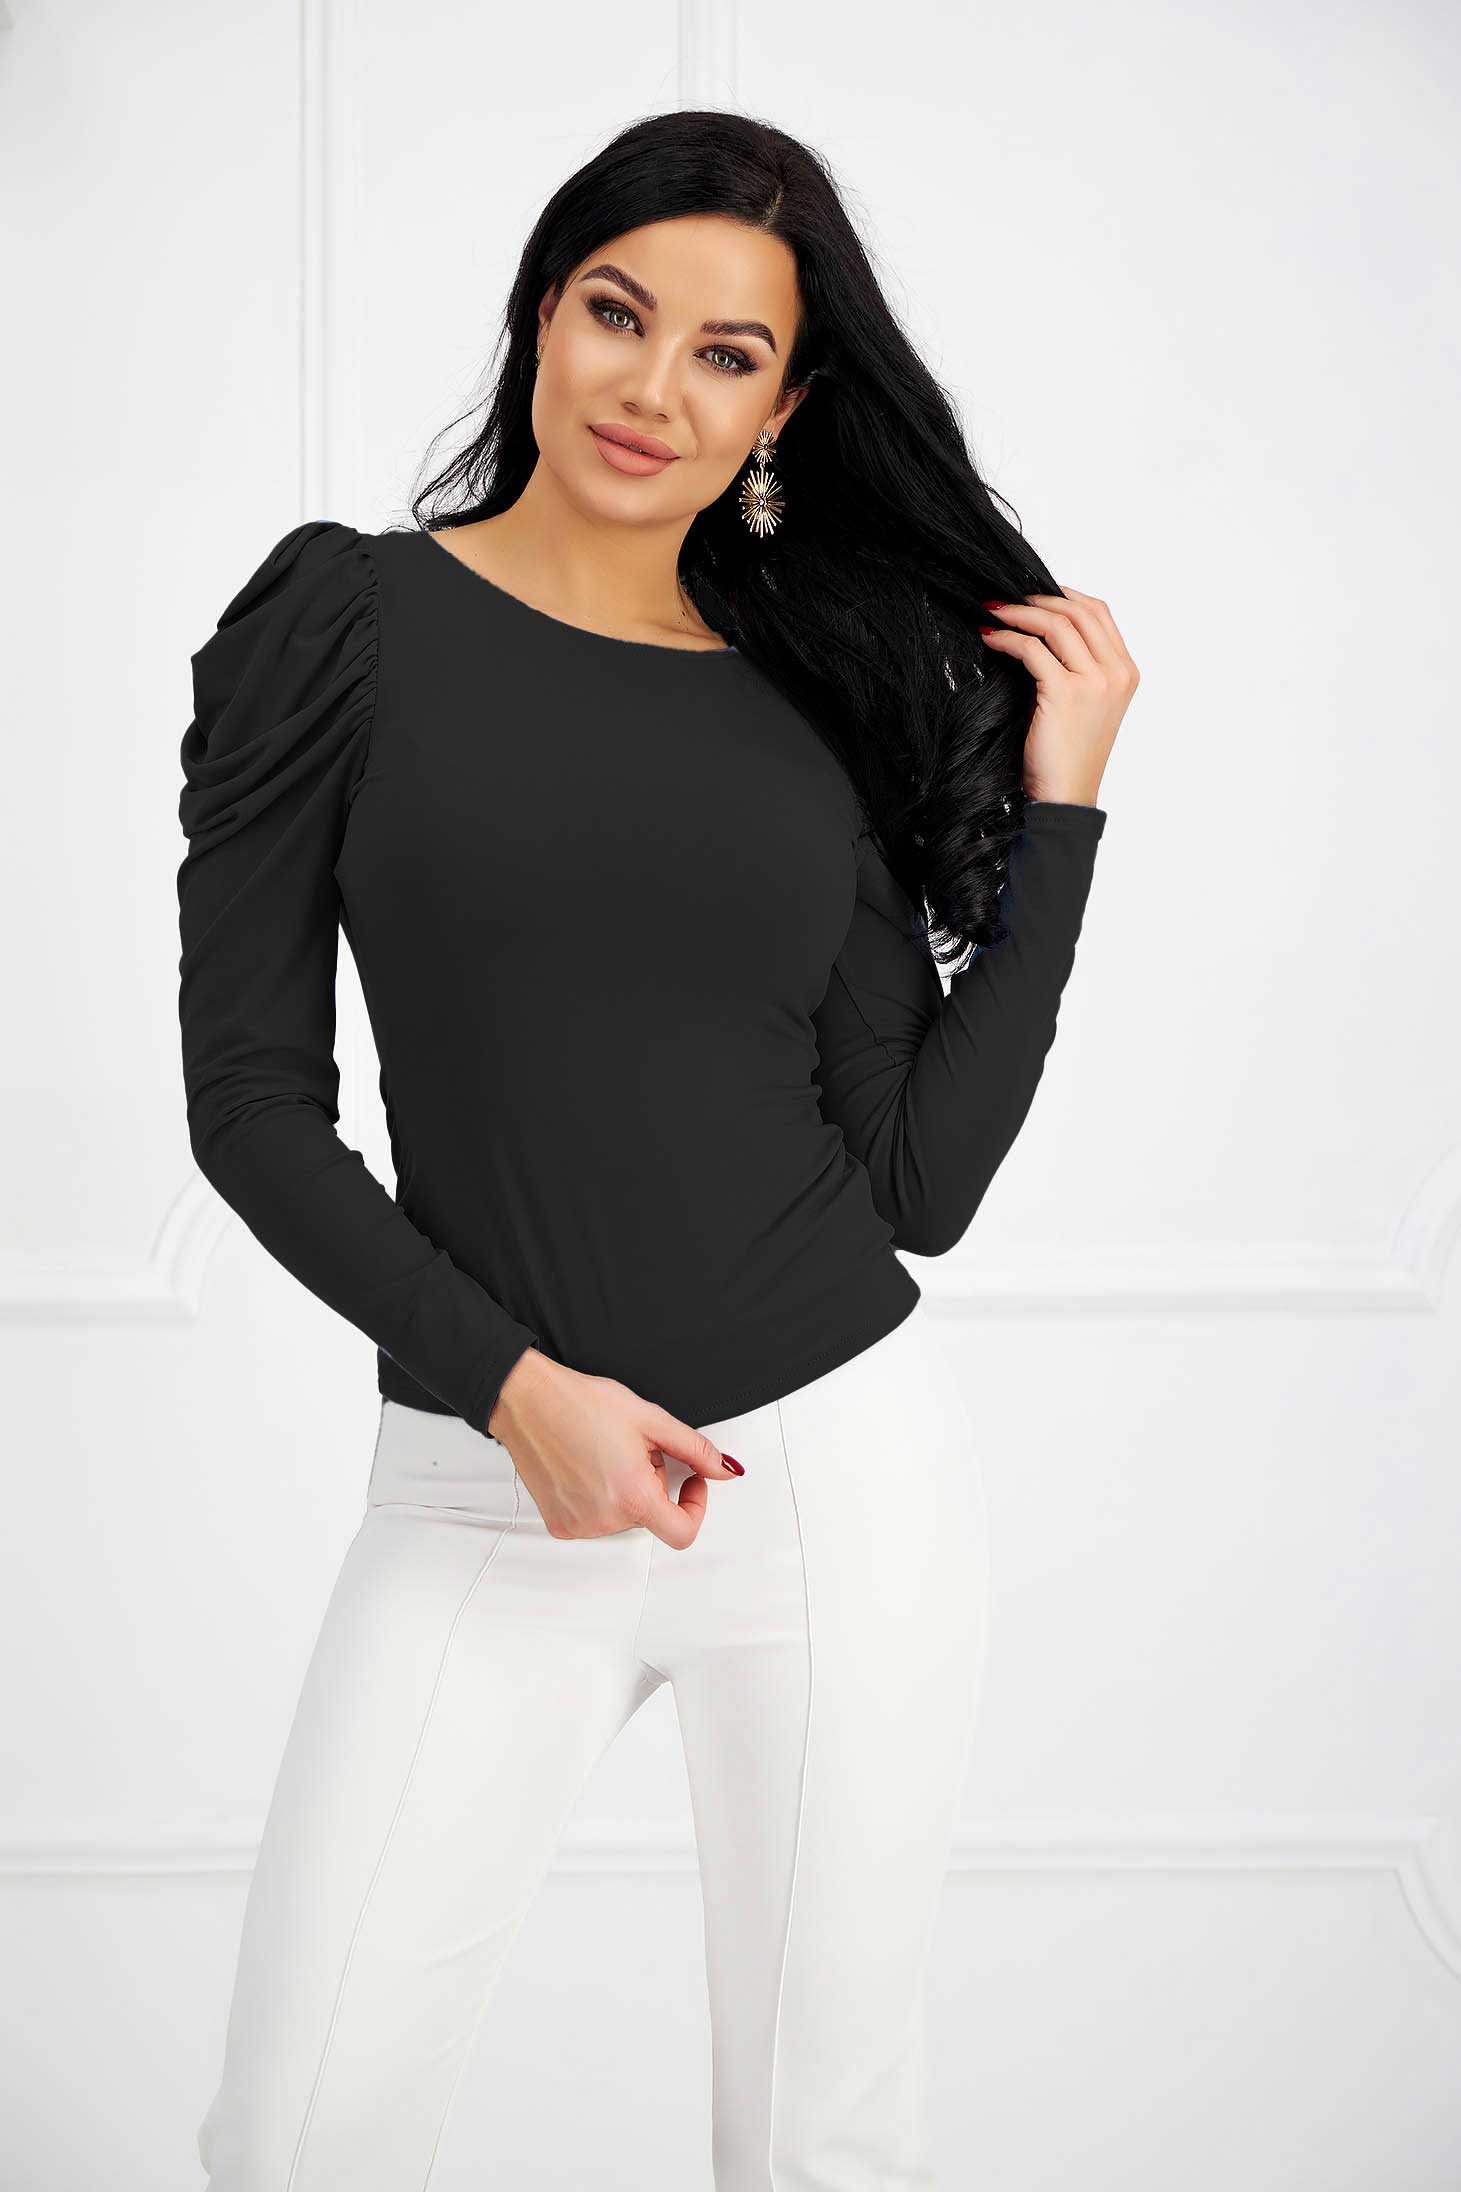 Black Lycra Women's Blouse with Puffed Shoulders - StarShinerS 1 - StarShinerS.com